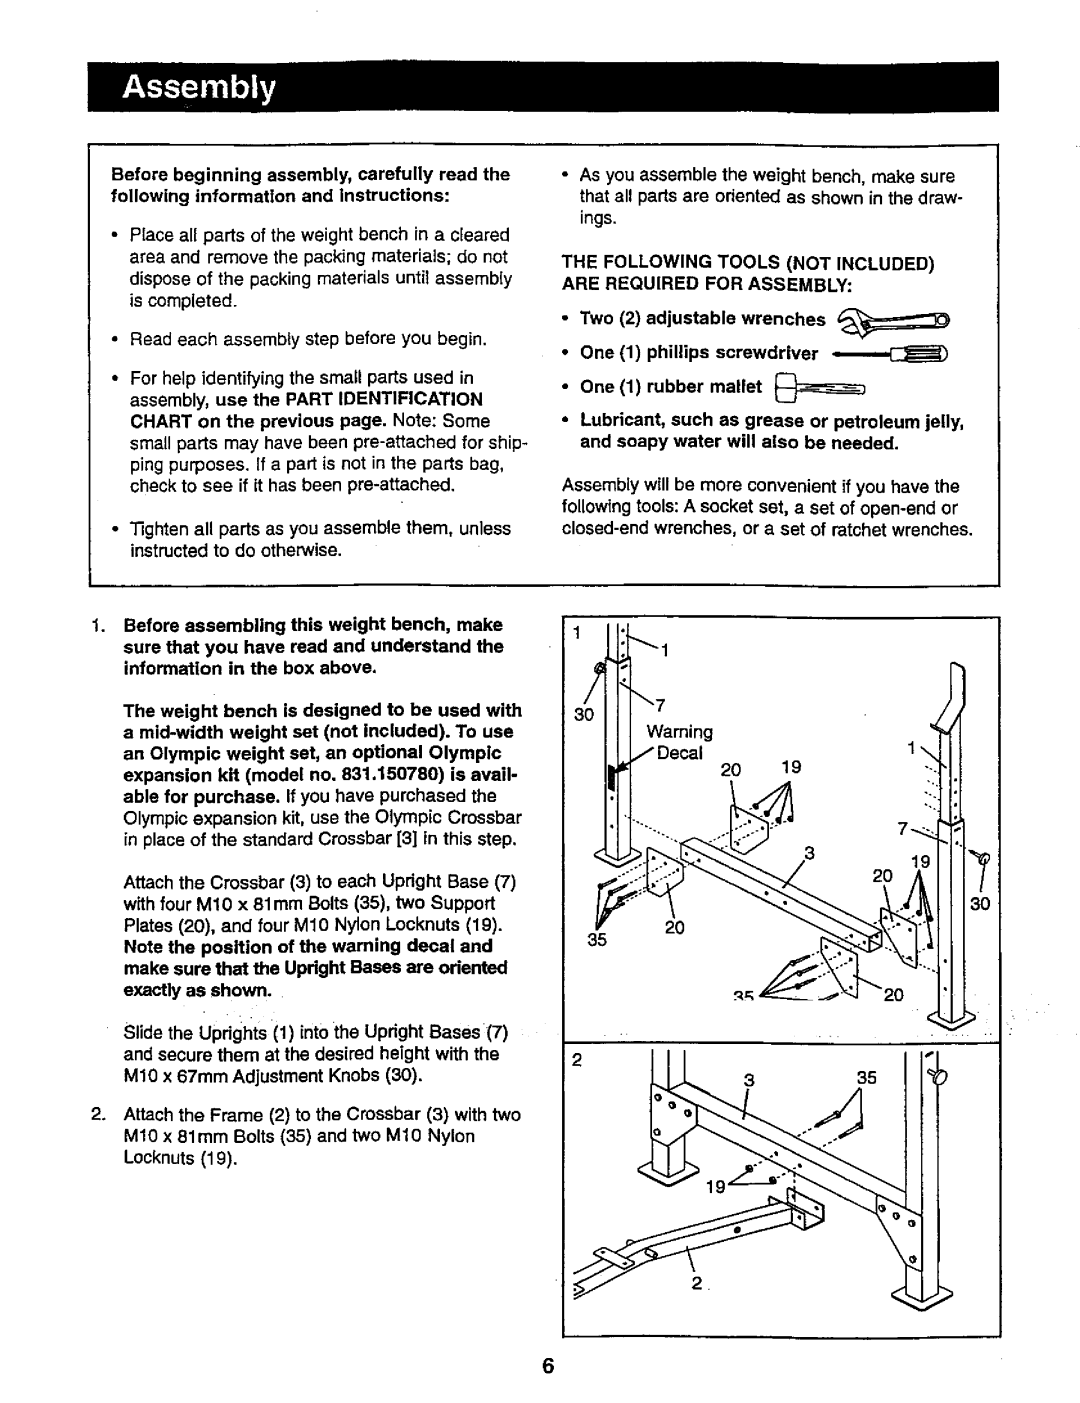 Weider 831,150,741 user manual The Following Tools Not Included Are Required For Assembly 